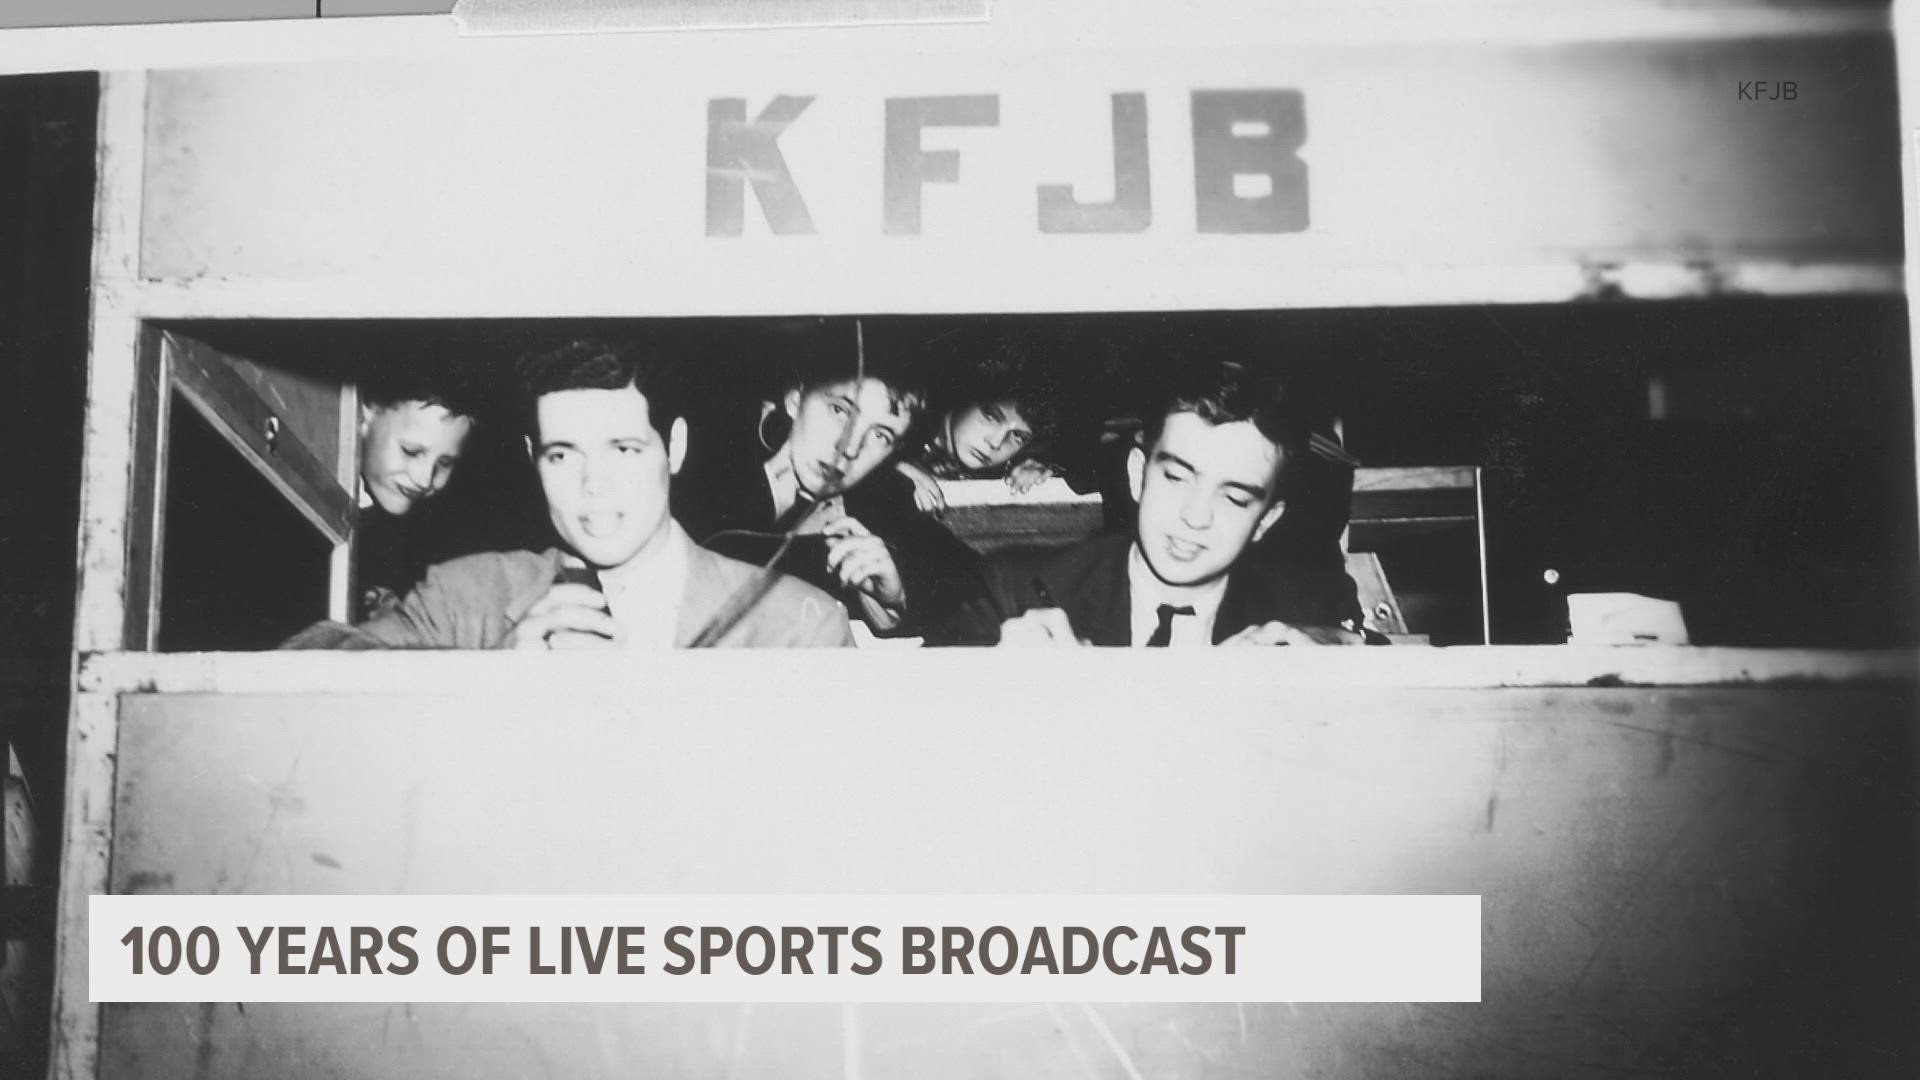 On Sept. 23, 1922, KFJB radio in Marshalltown put on the first live broadcast of a sporting event in the country.